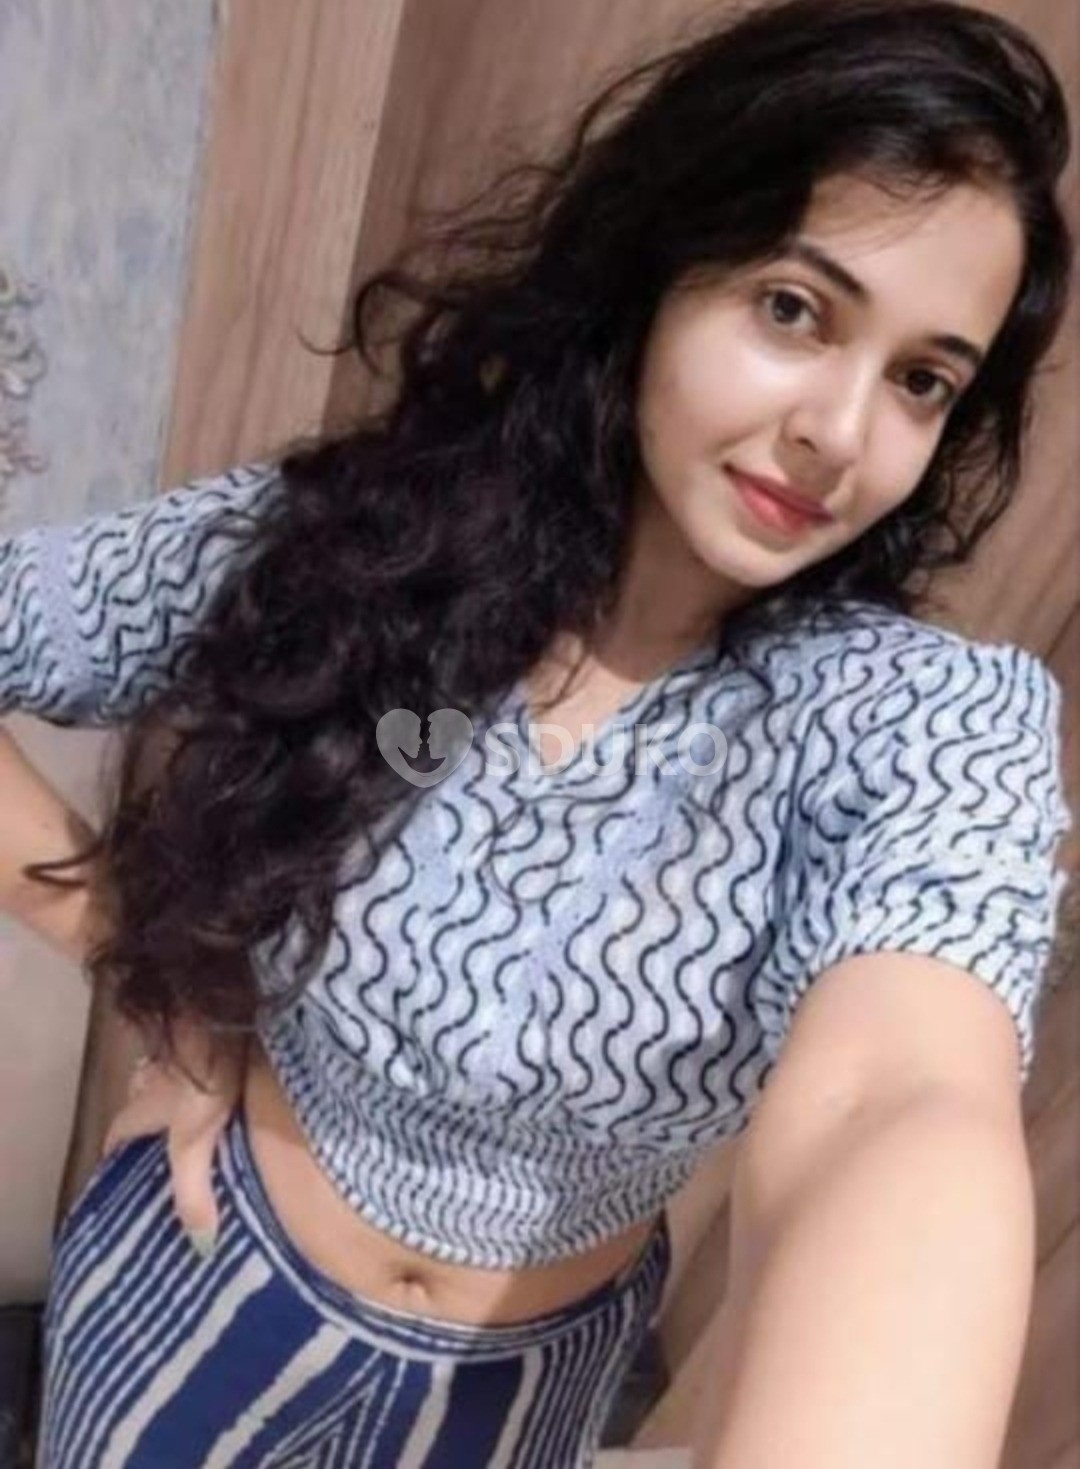 Gachibowli LOW PRICE🔸✅kb( 24×7 ) SERVICE A AVAILABLE 100% SAFE AND S SECURE UNLIMITED ENJOY HOT COLLEGE GIRL HOUSE